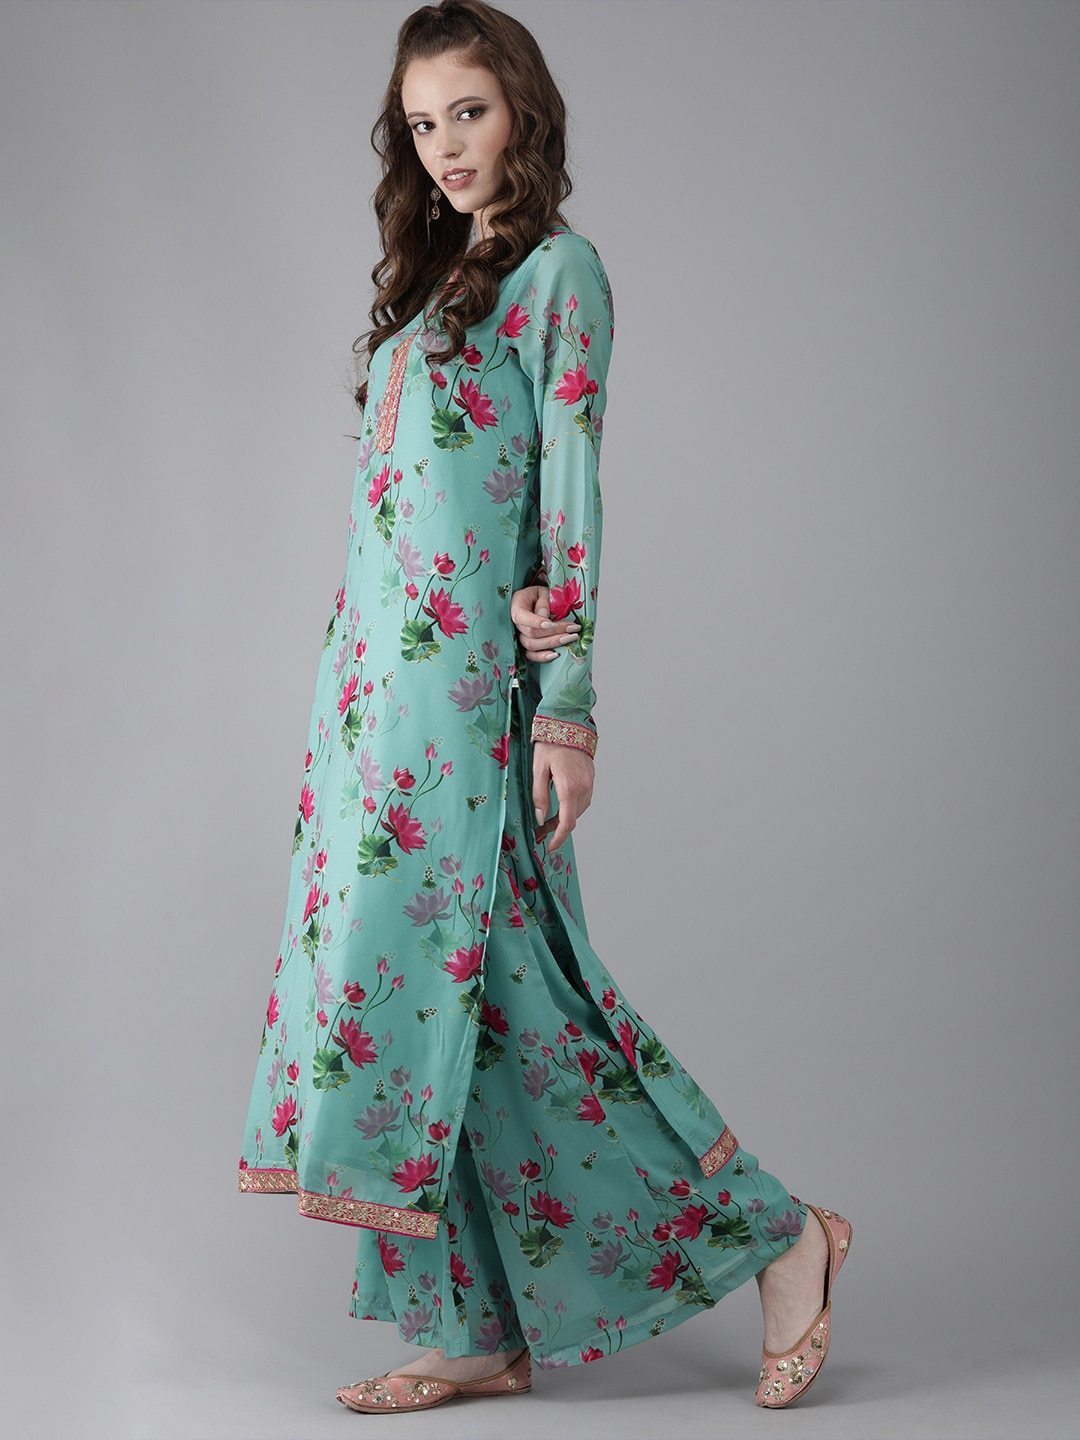 Women's  Turquoise Blue & Pink Printed Kurta with Palazzos & Dupatta - Final Clearance Sale